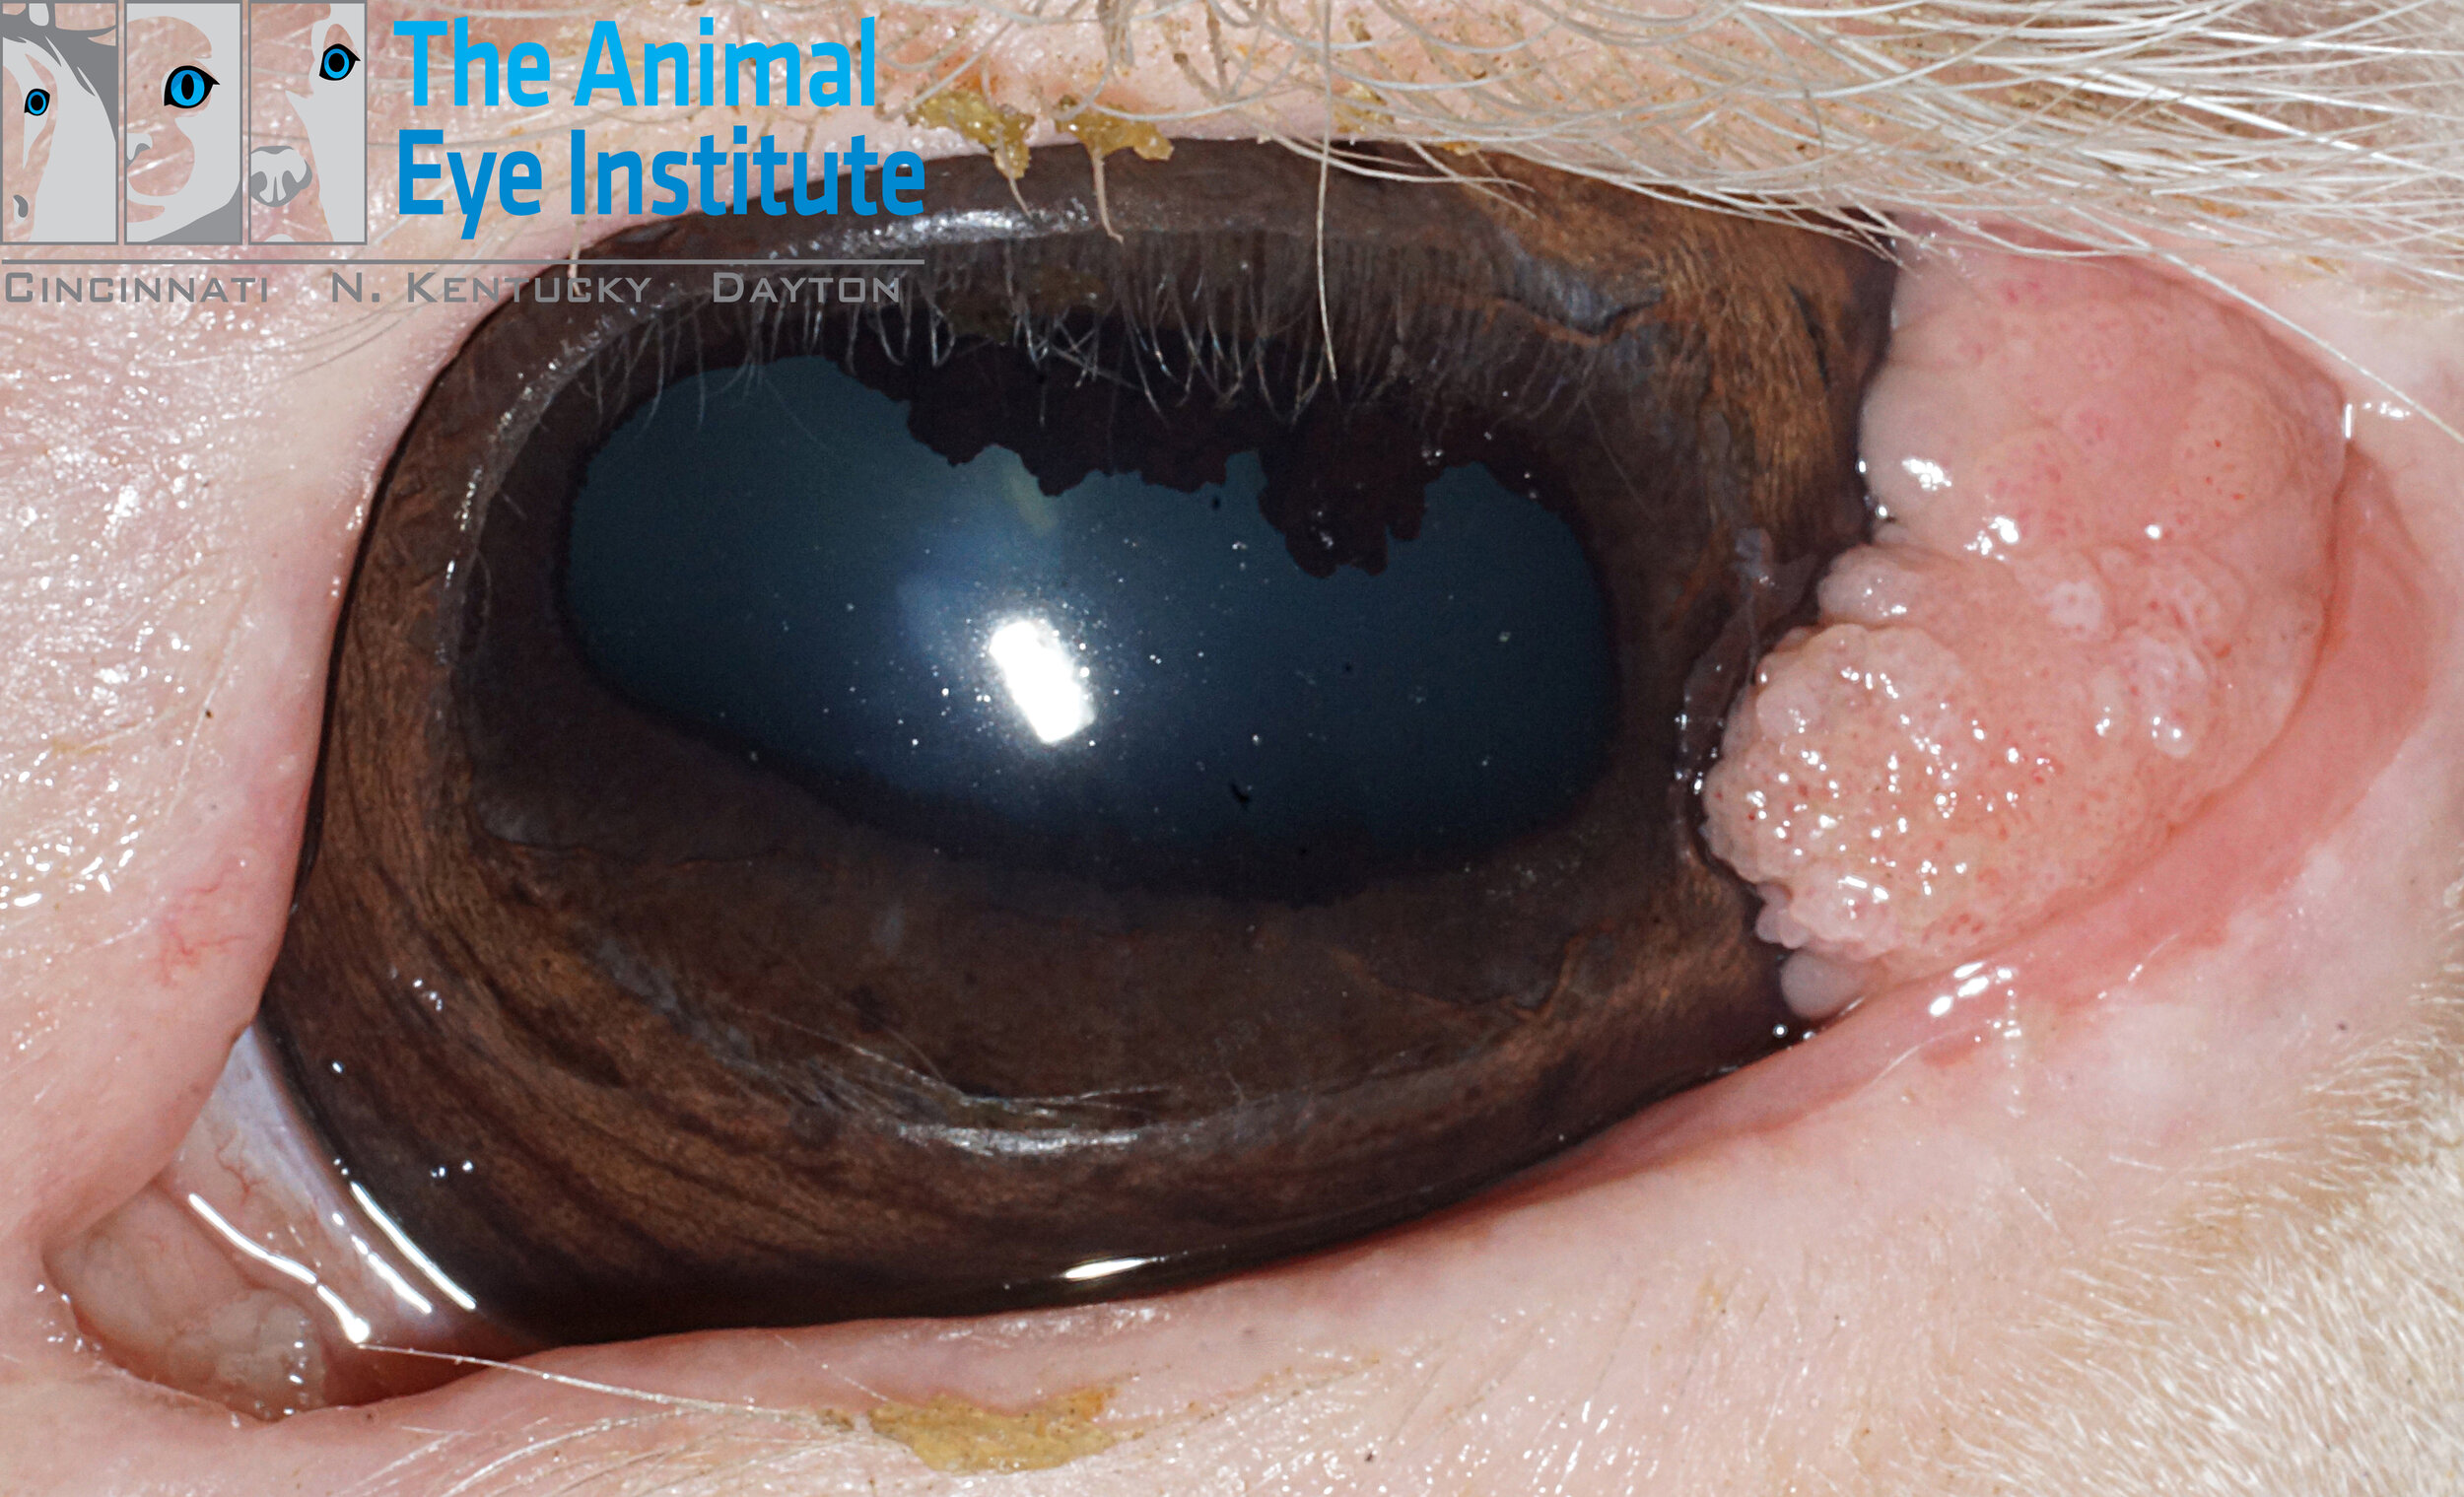 Eq Limbal Squamous Cell Carcinoma Cloud Gray 6.8.16 copy.jpg